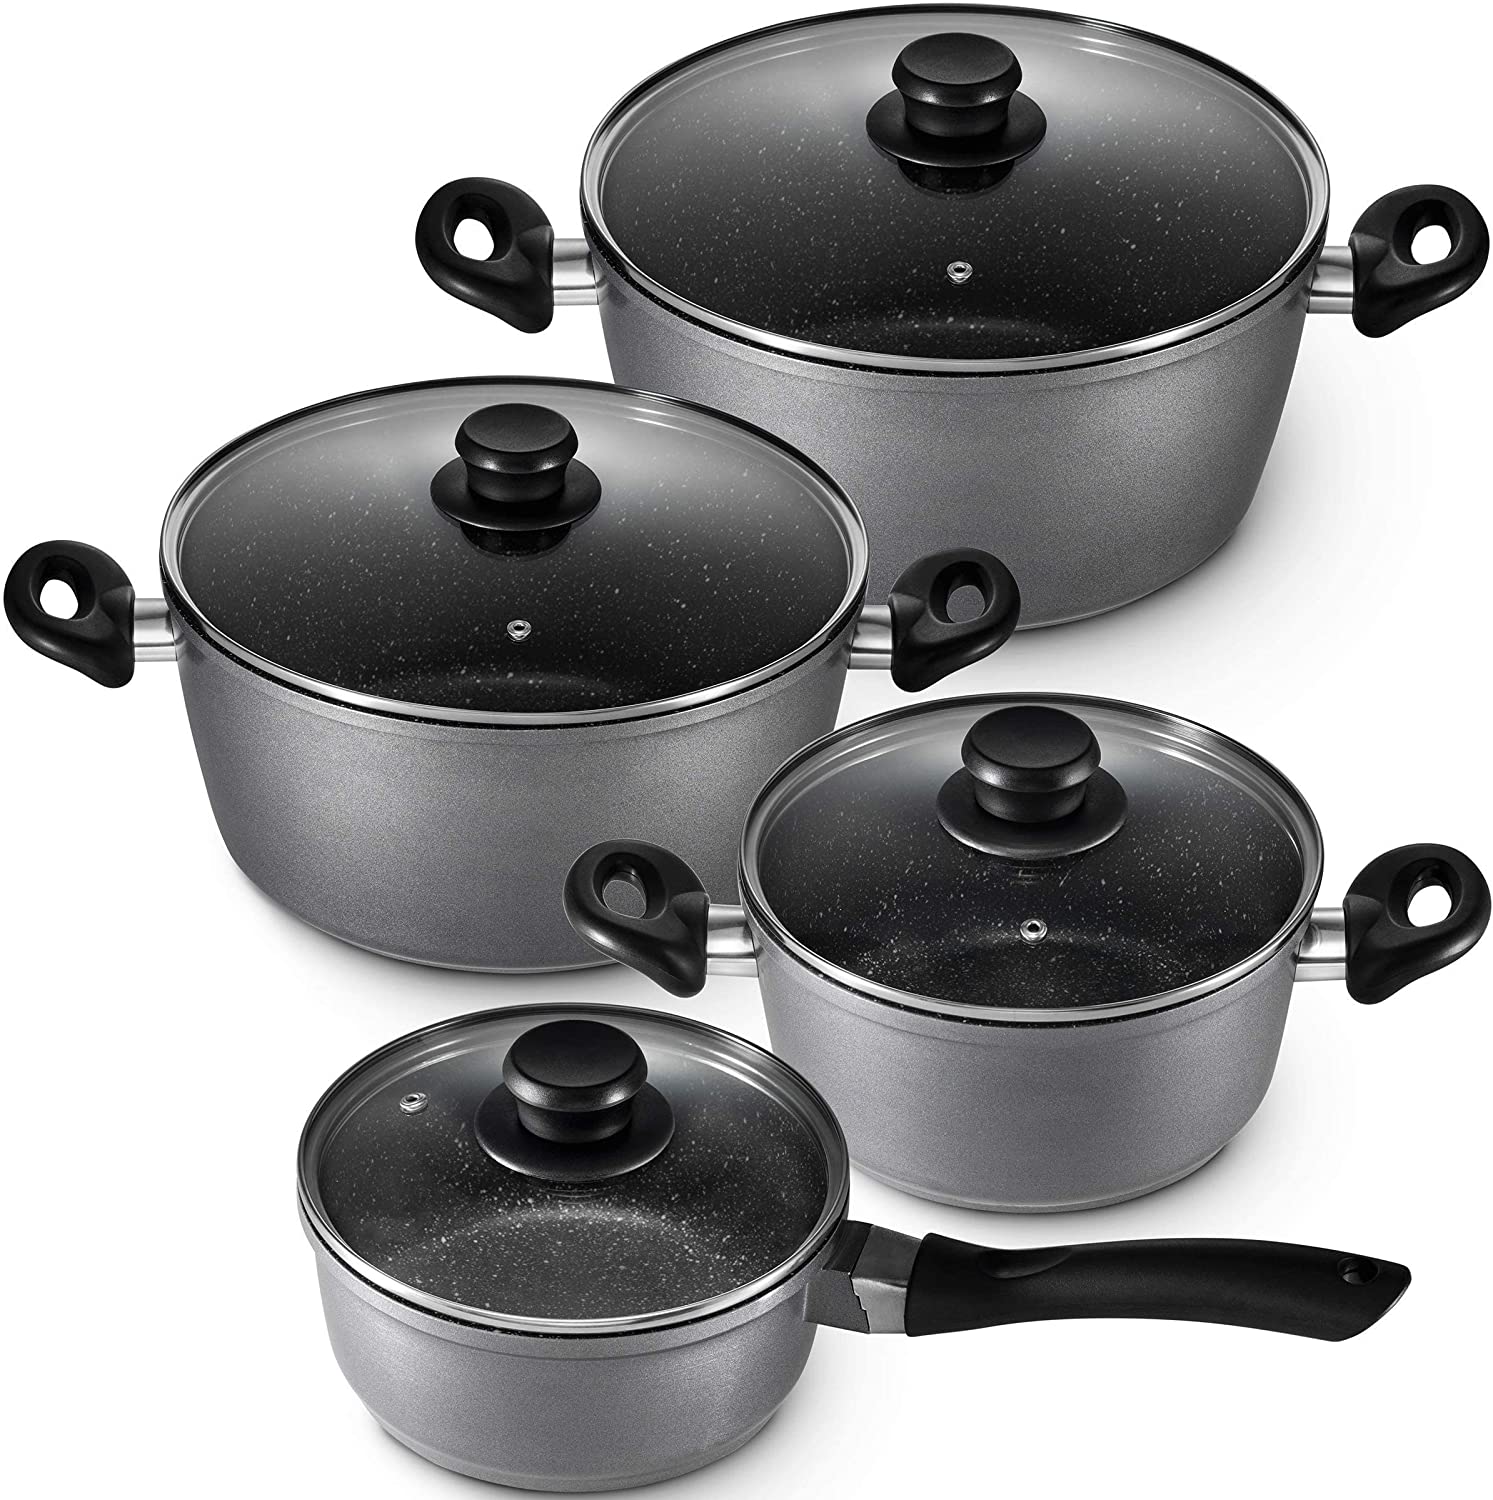 GOURMEX 7L Induction Casserole Pot | Black with Nonstick Coating